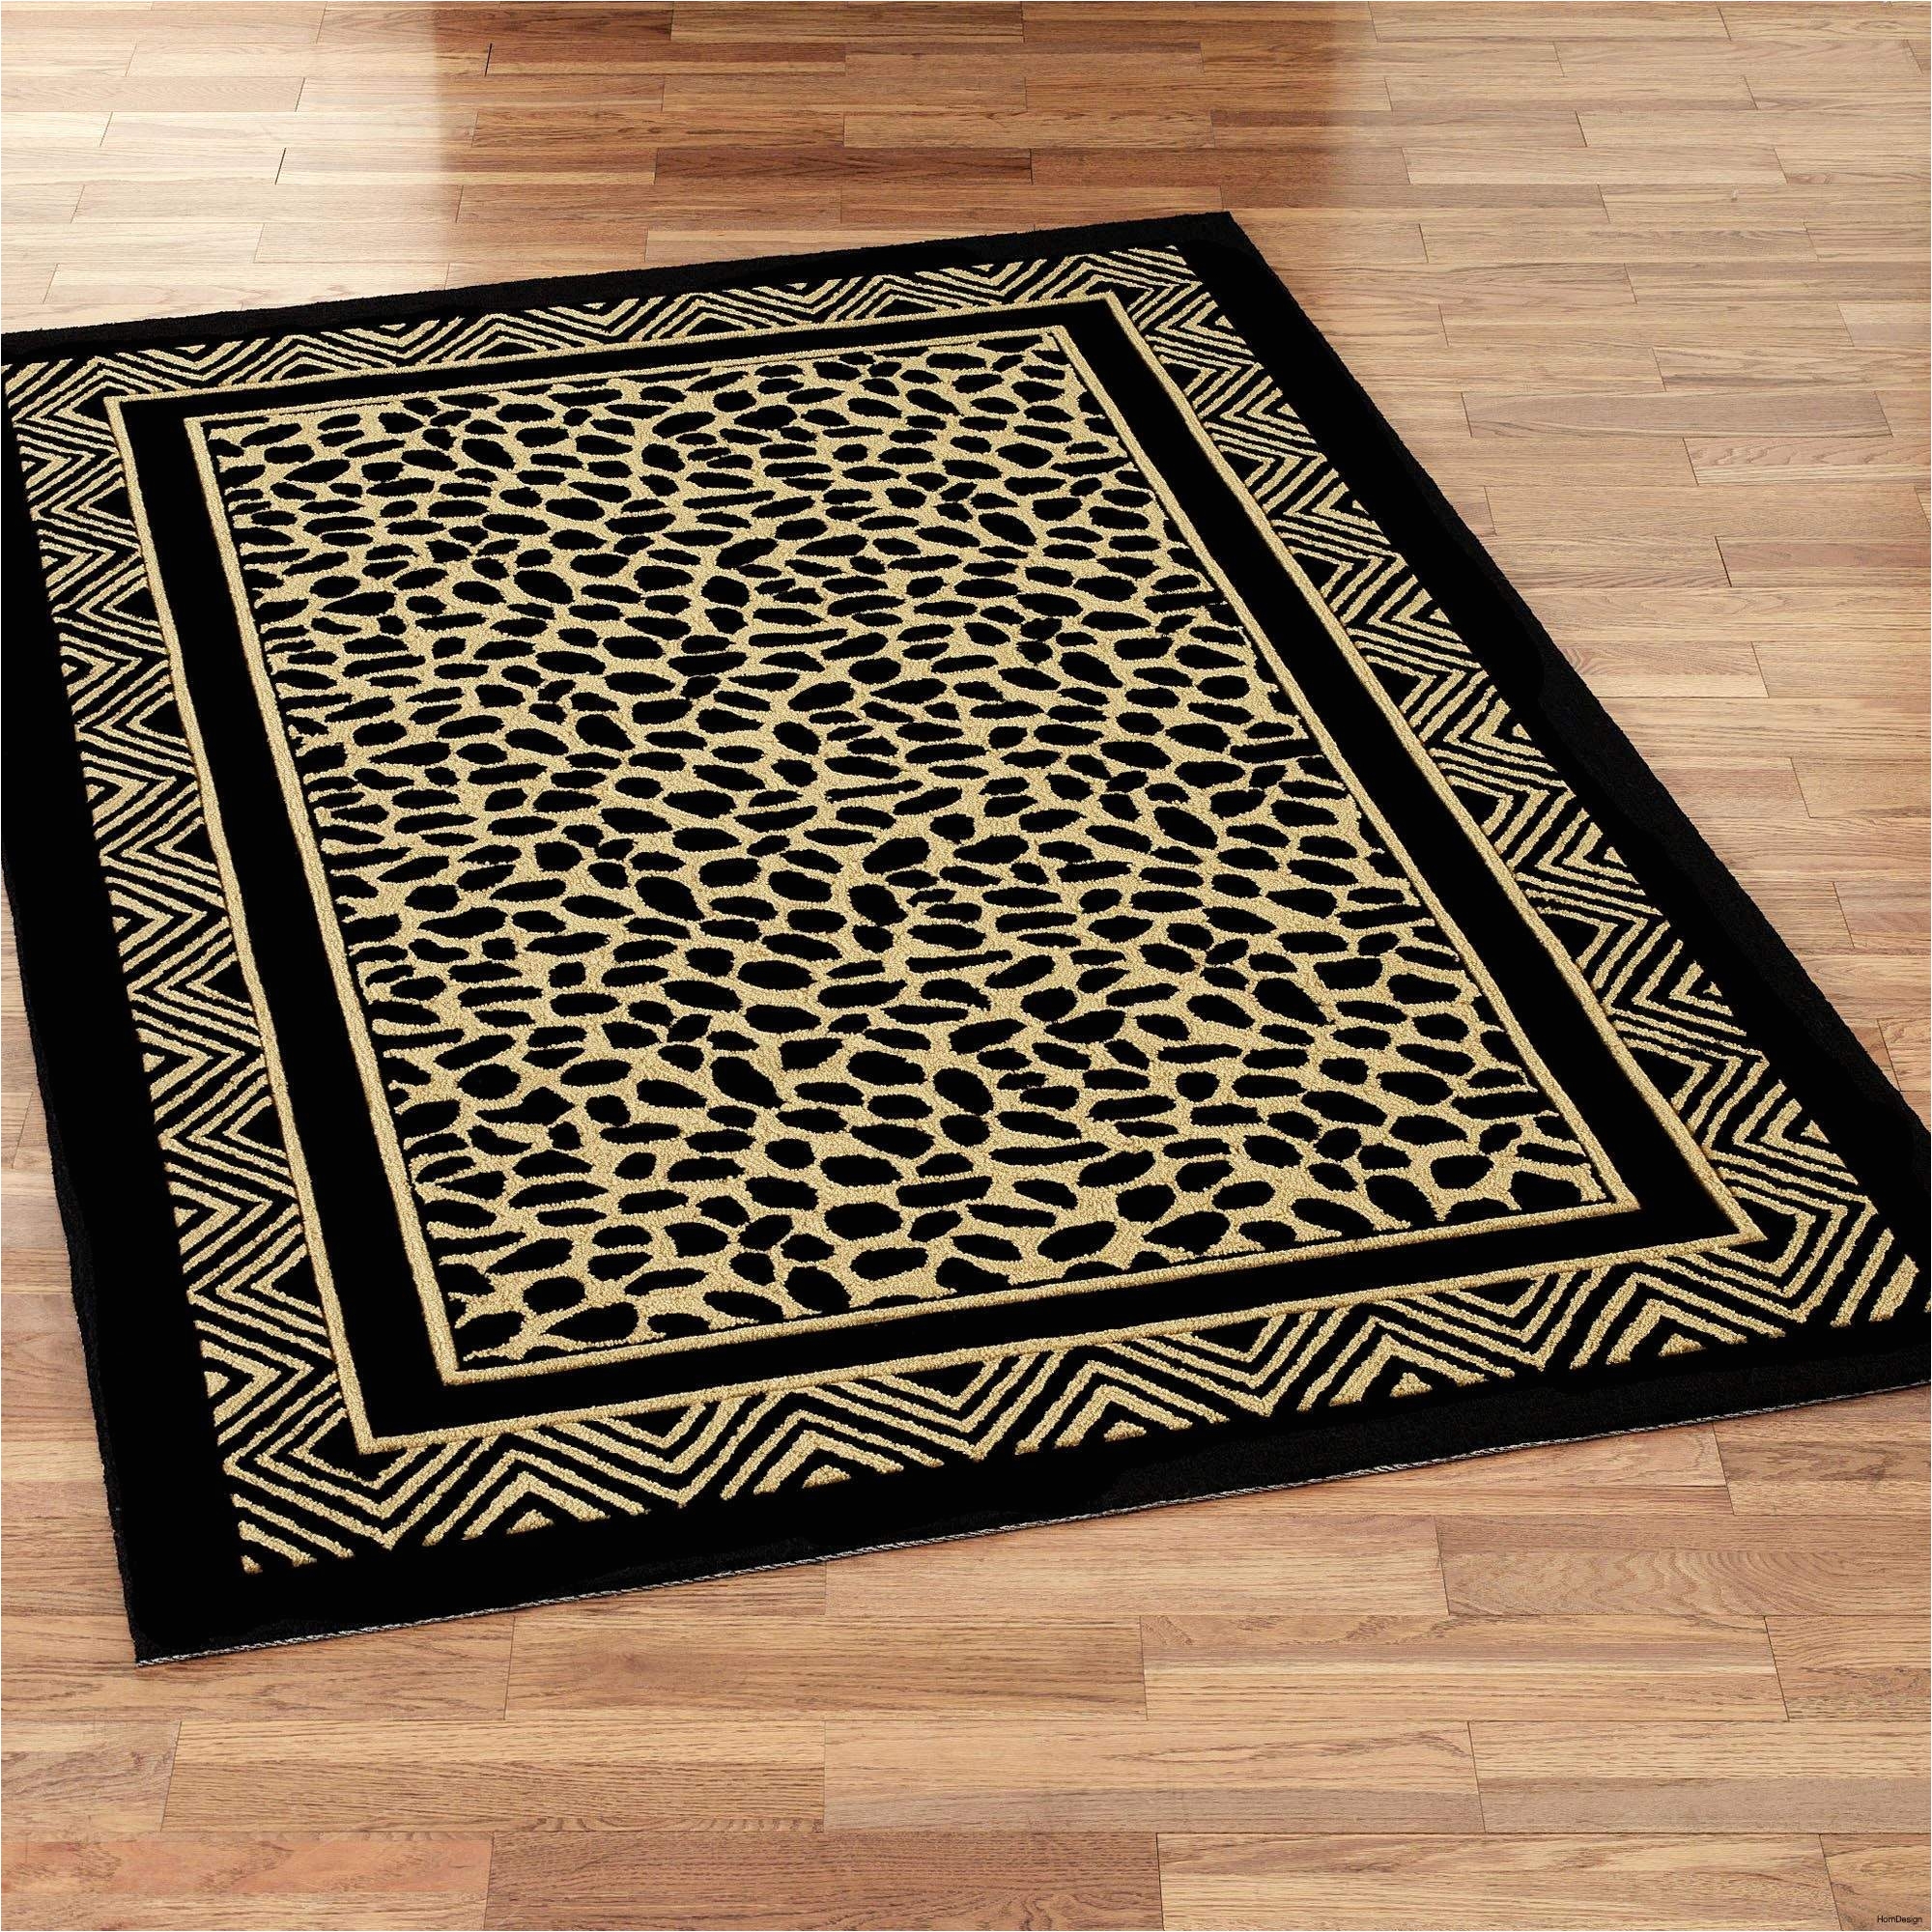 37 greatest cheap red and black area rugs best